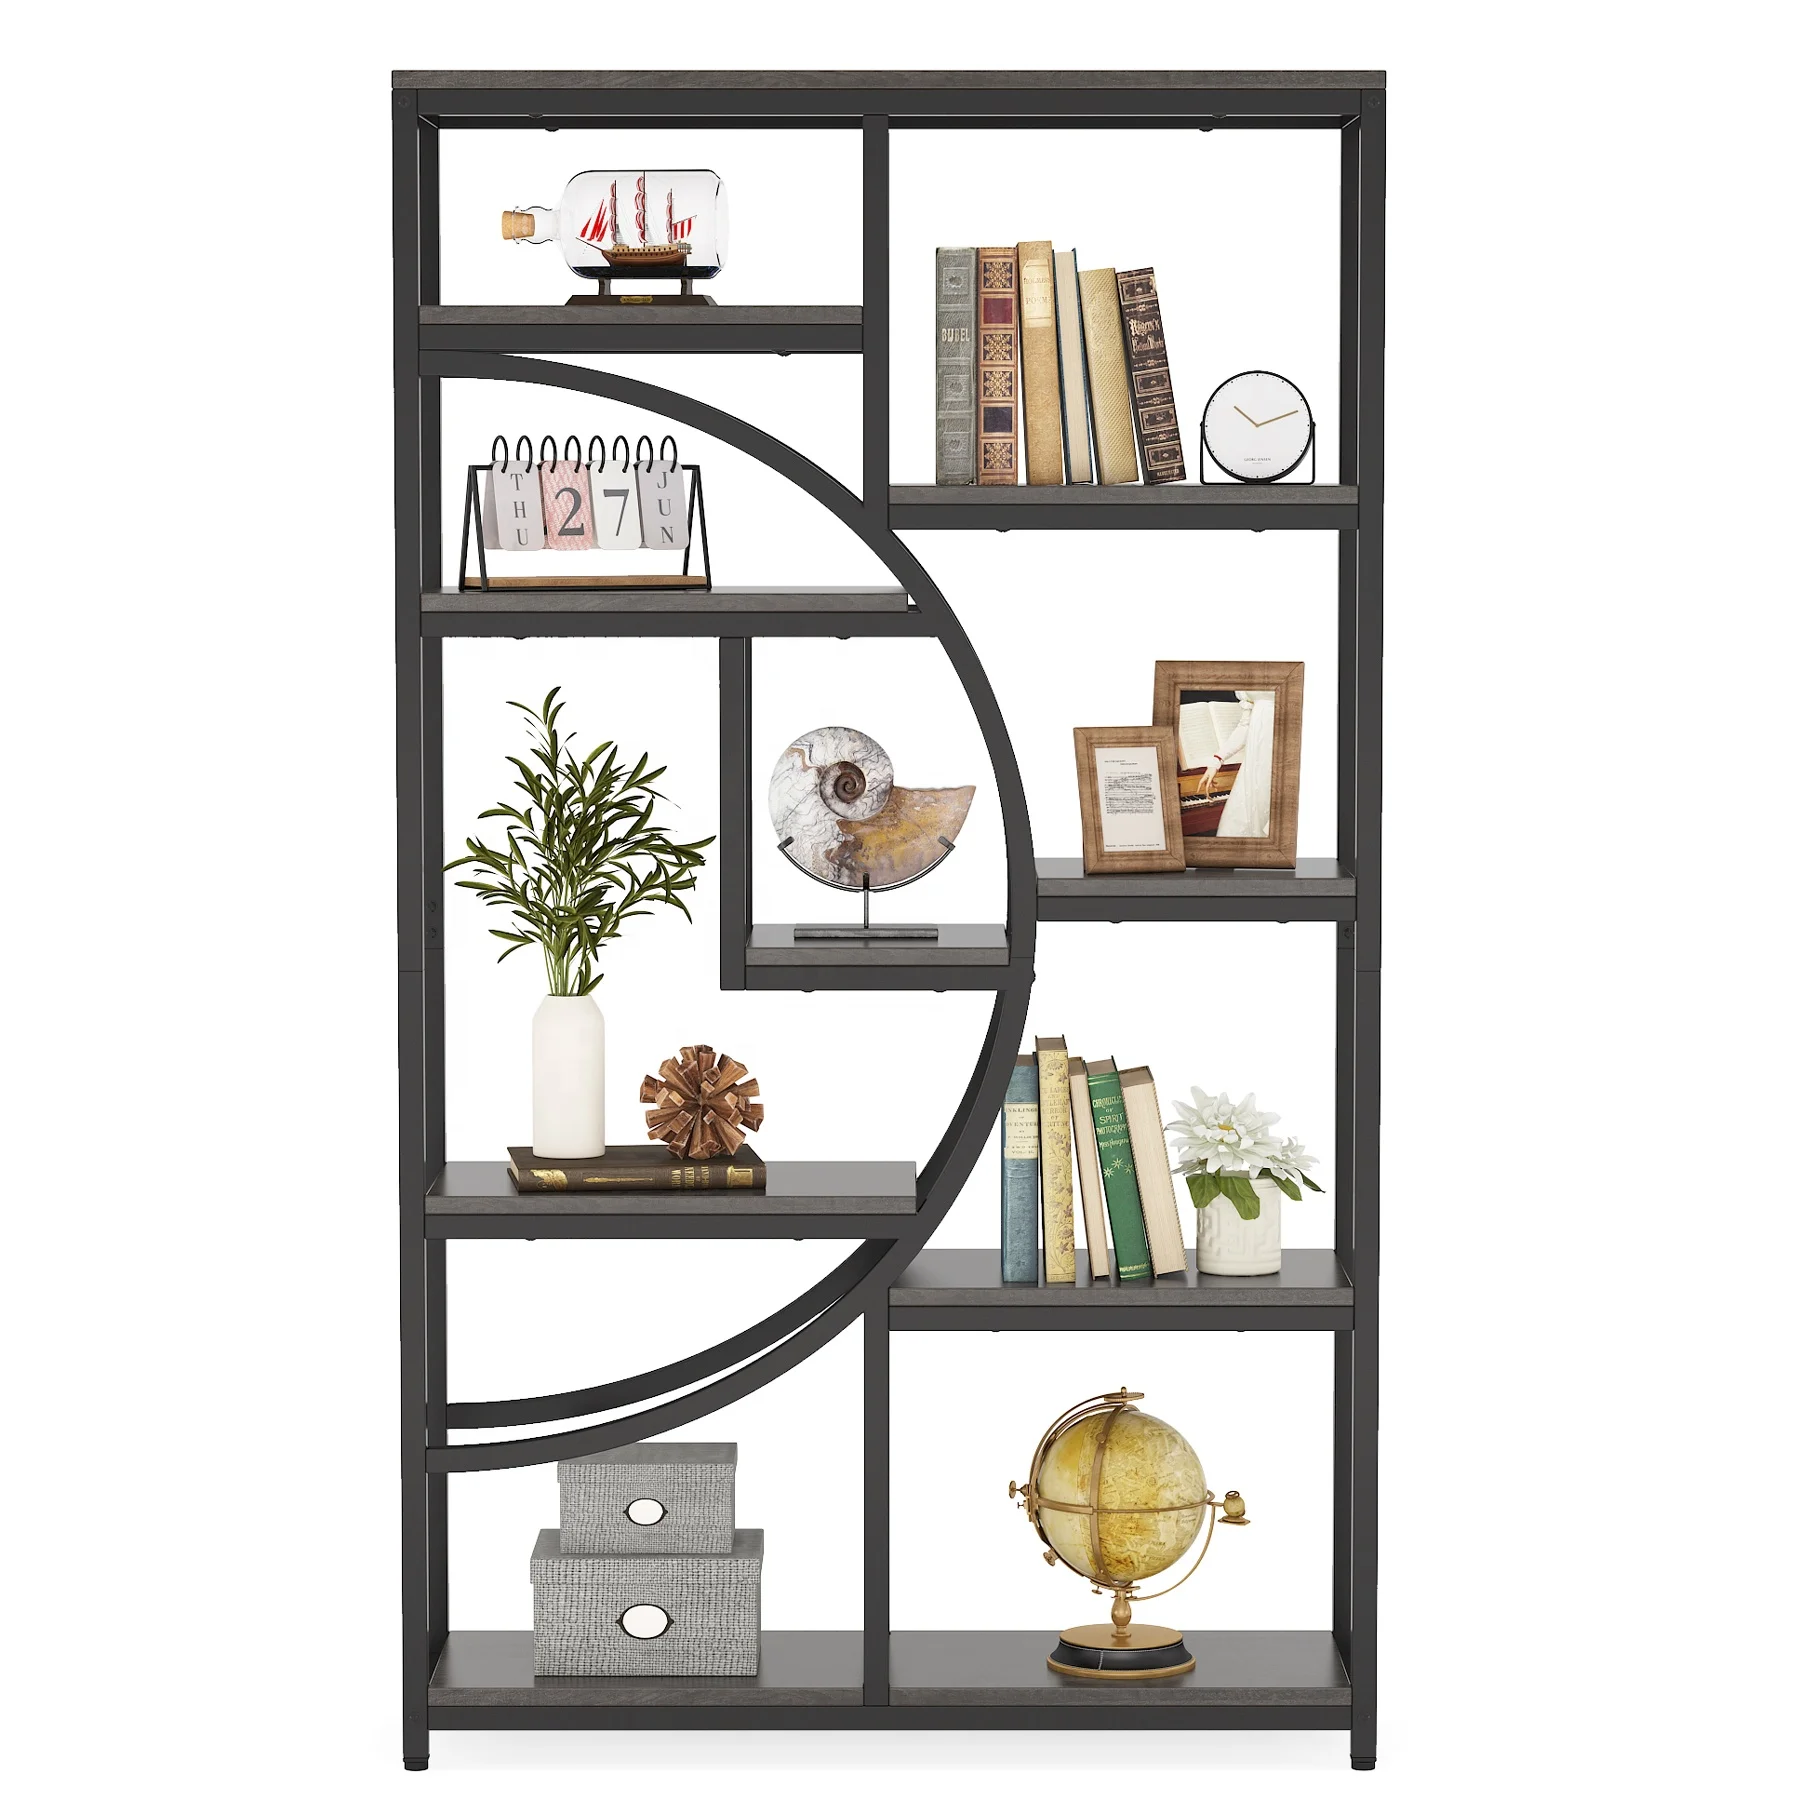 Large Etagere Triple Wide Bookshelf Open Display Shelves Geometric Tall Bookcase with Sturdy Metal Frame for decor Bedroom Home